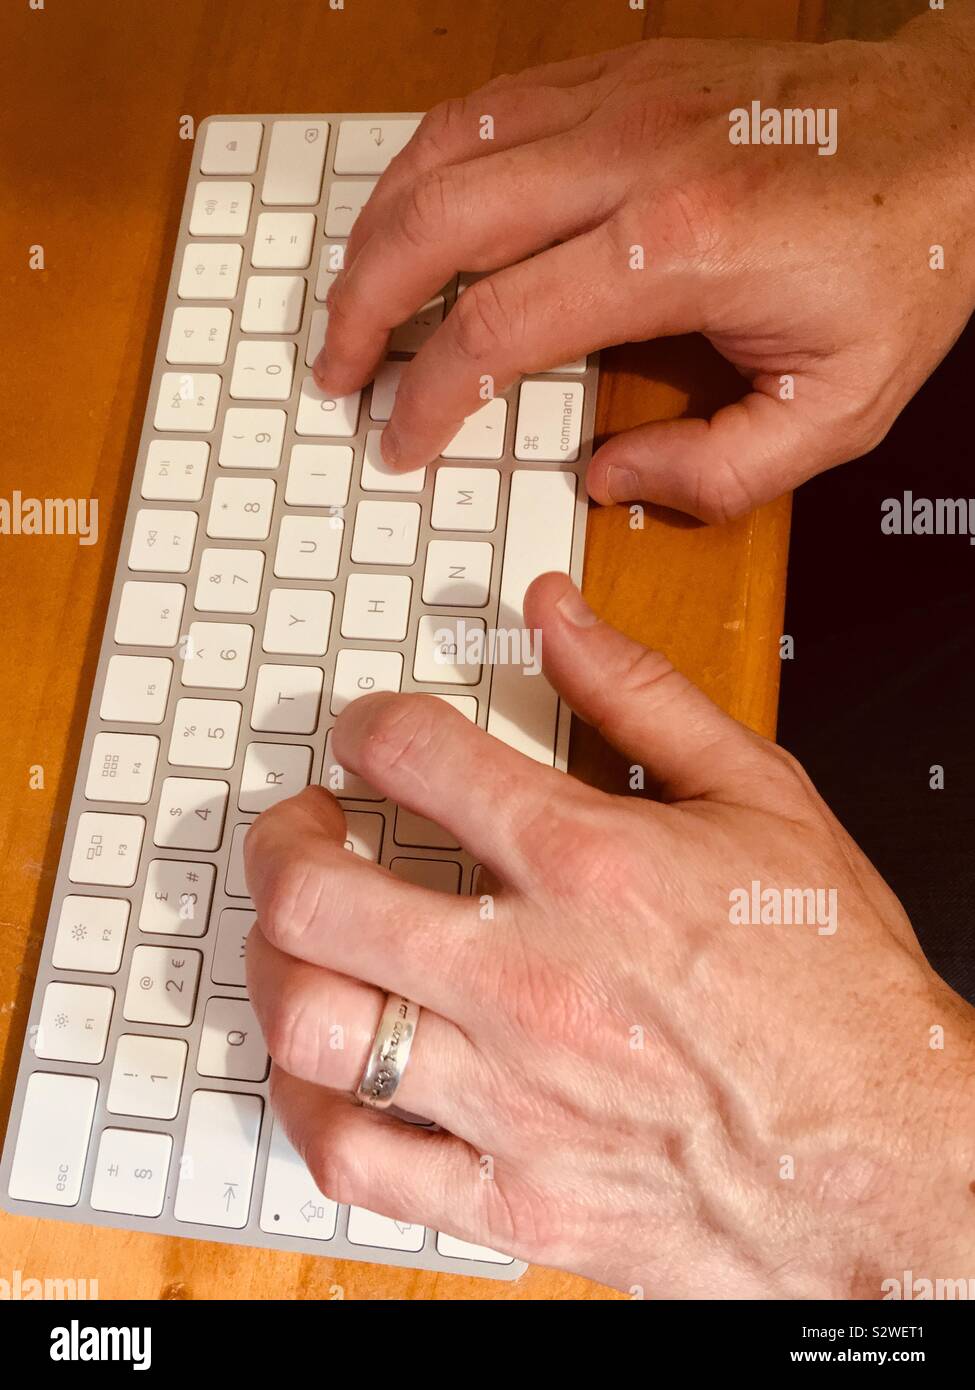 Man typing on wireless keyboard at office desk Stock Photo